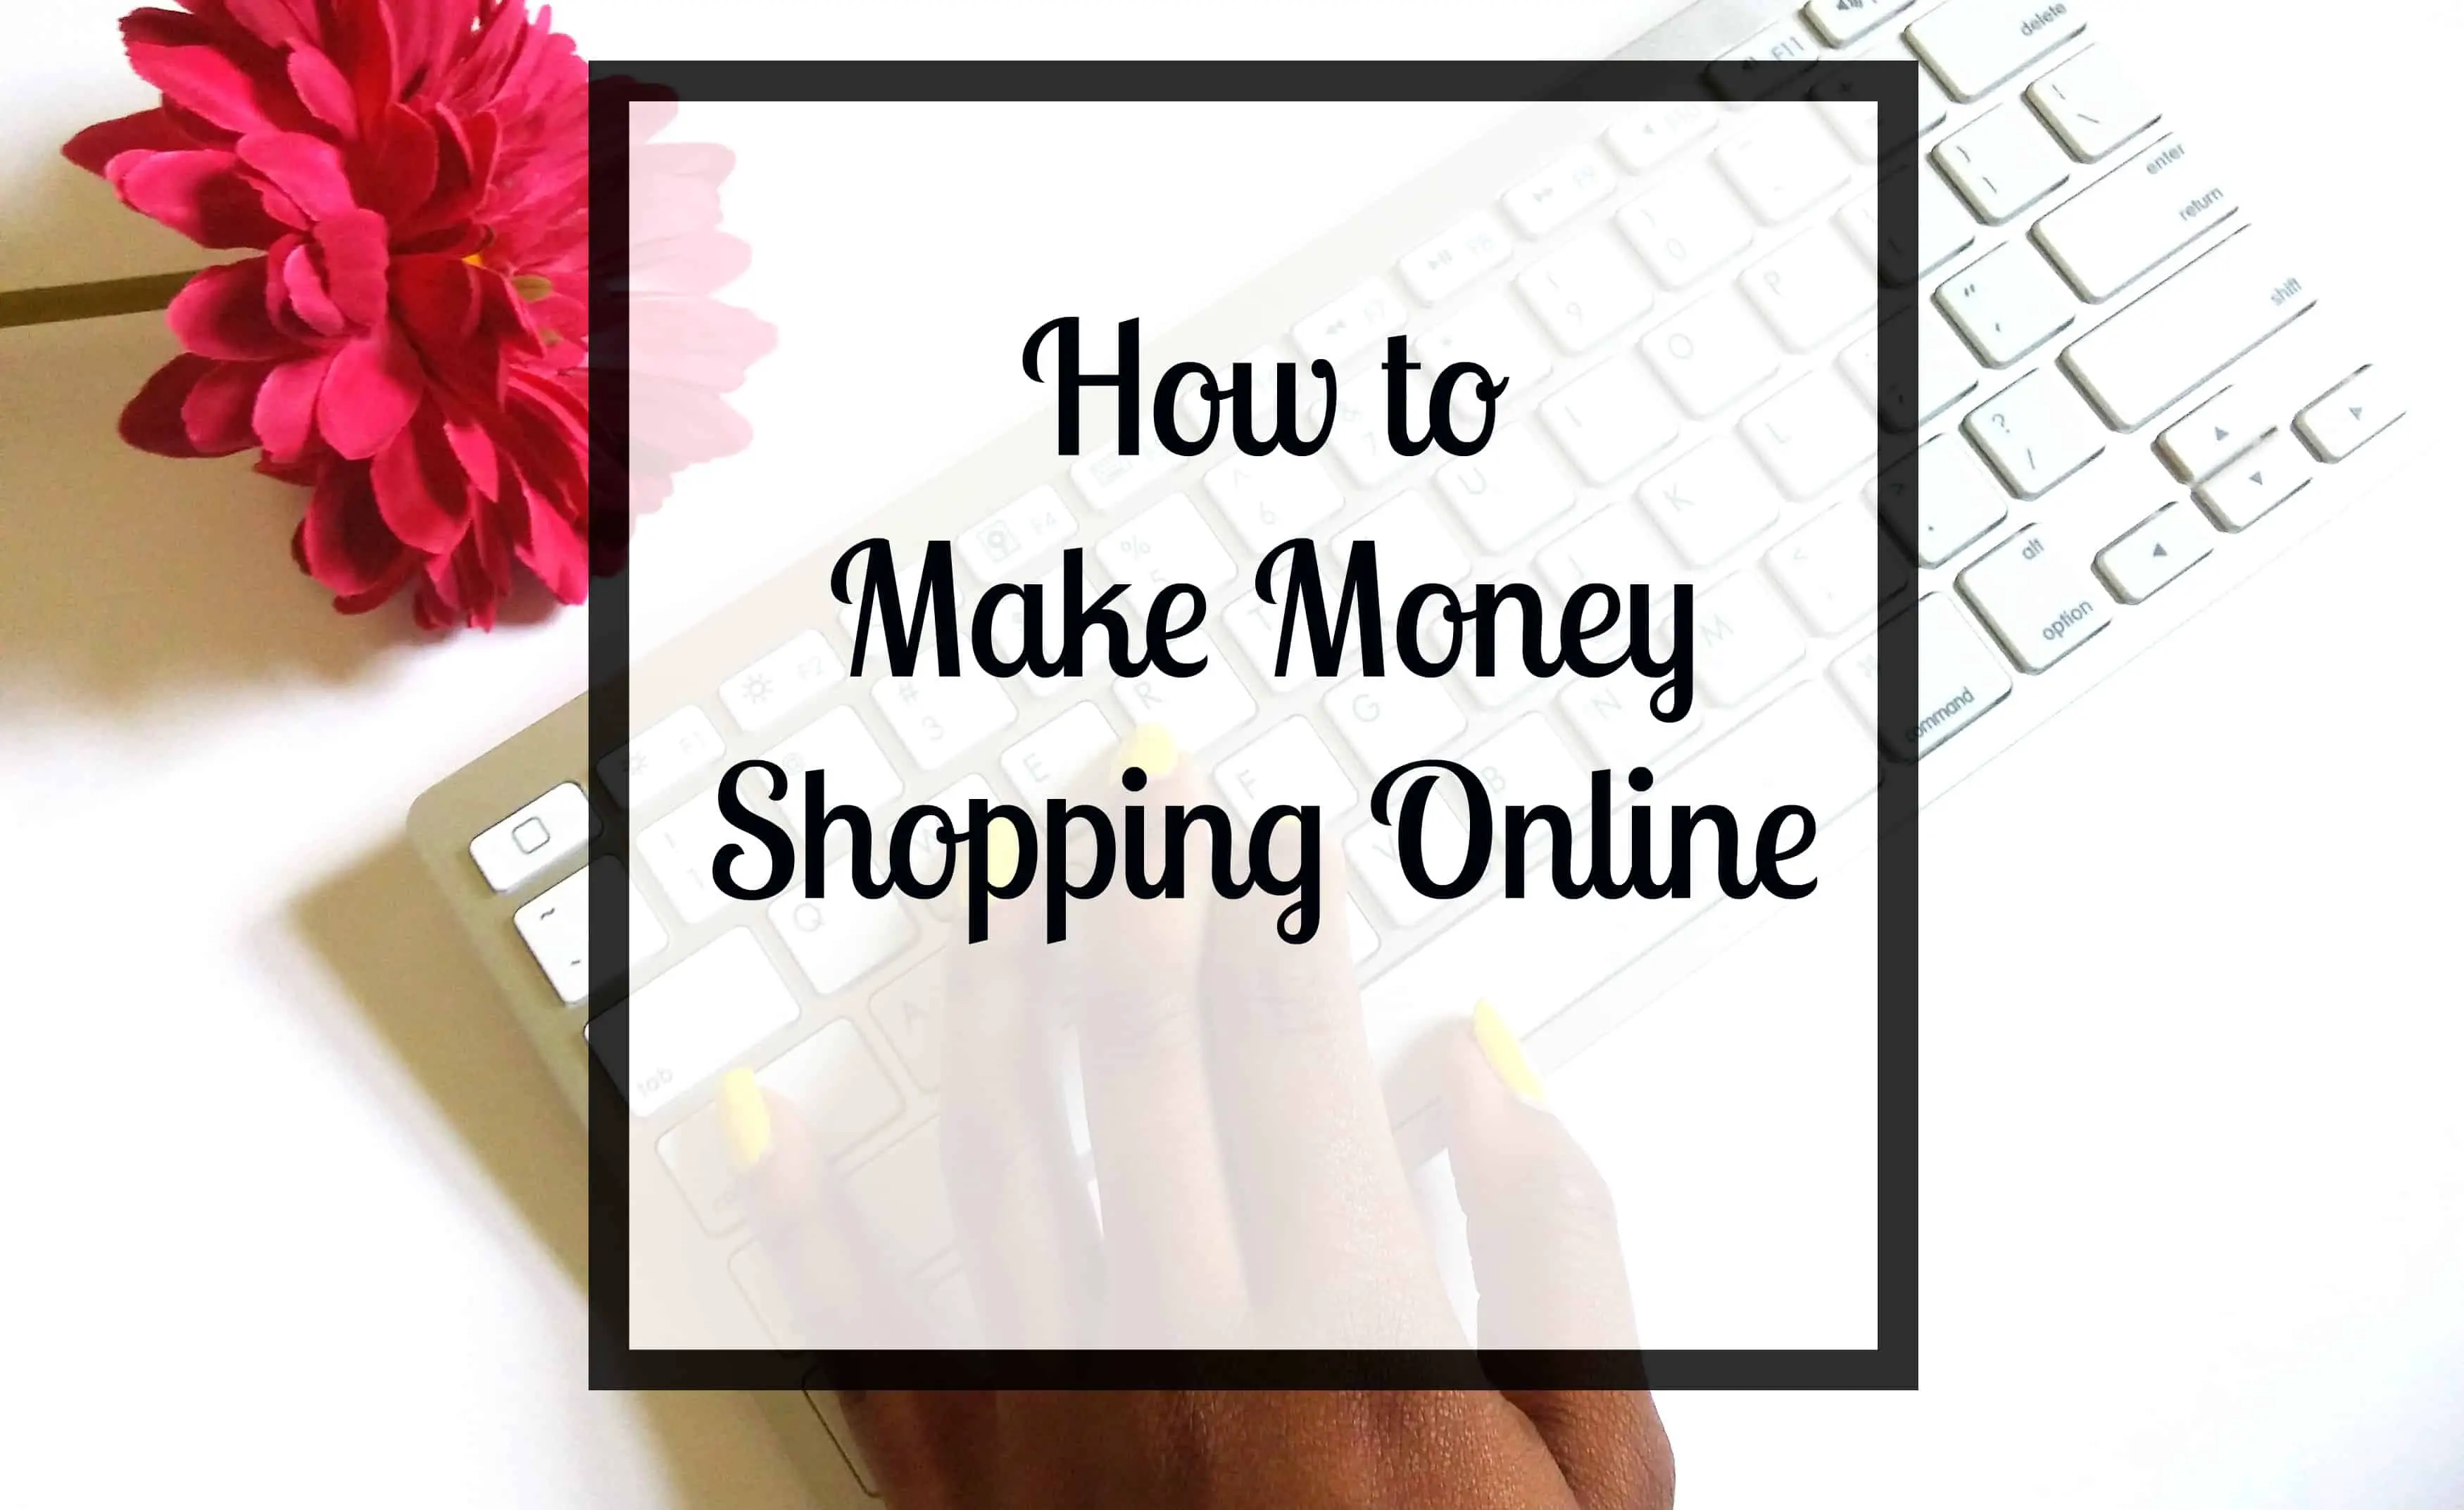 Do you love shopping online and getting packages delivered to your door? How would you like it if you could make money to shop?